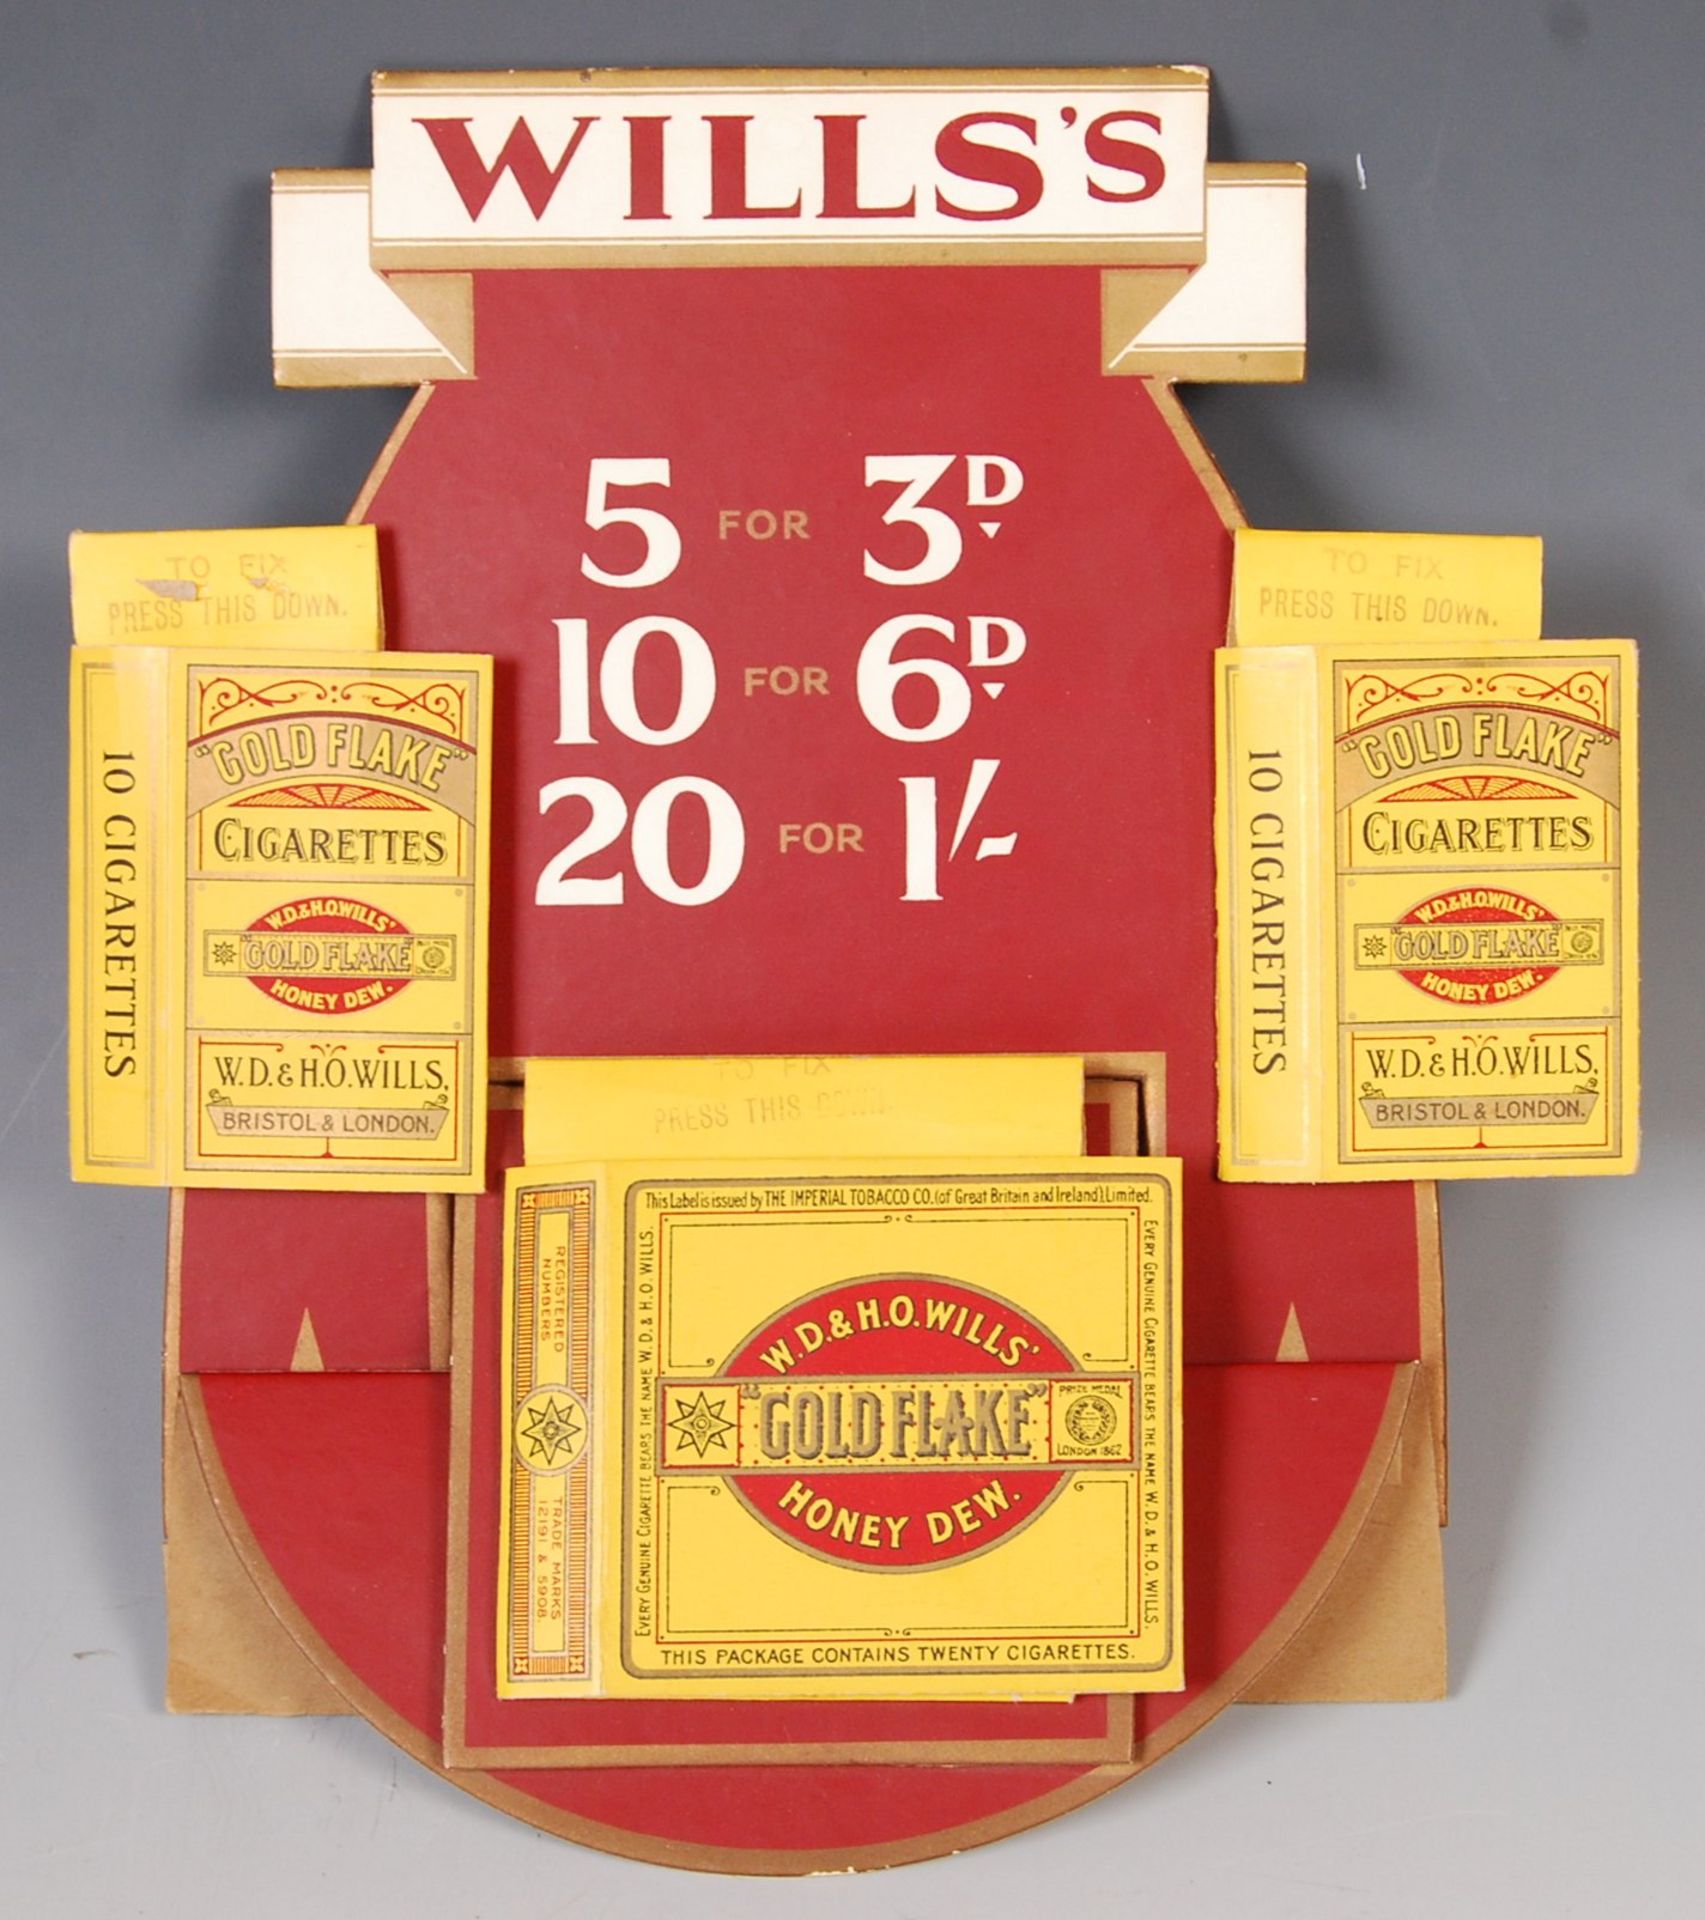 WILLS'S GOLD FLAKE CIGARETTES UNUSED SHOP ADVERTISING DISPLAY